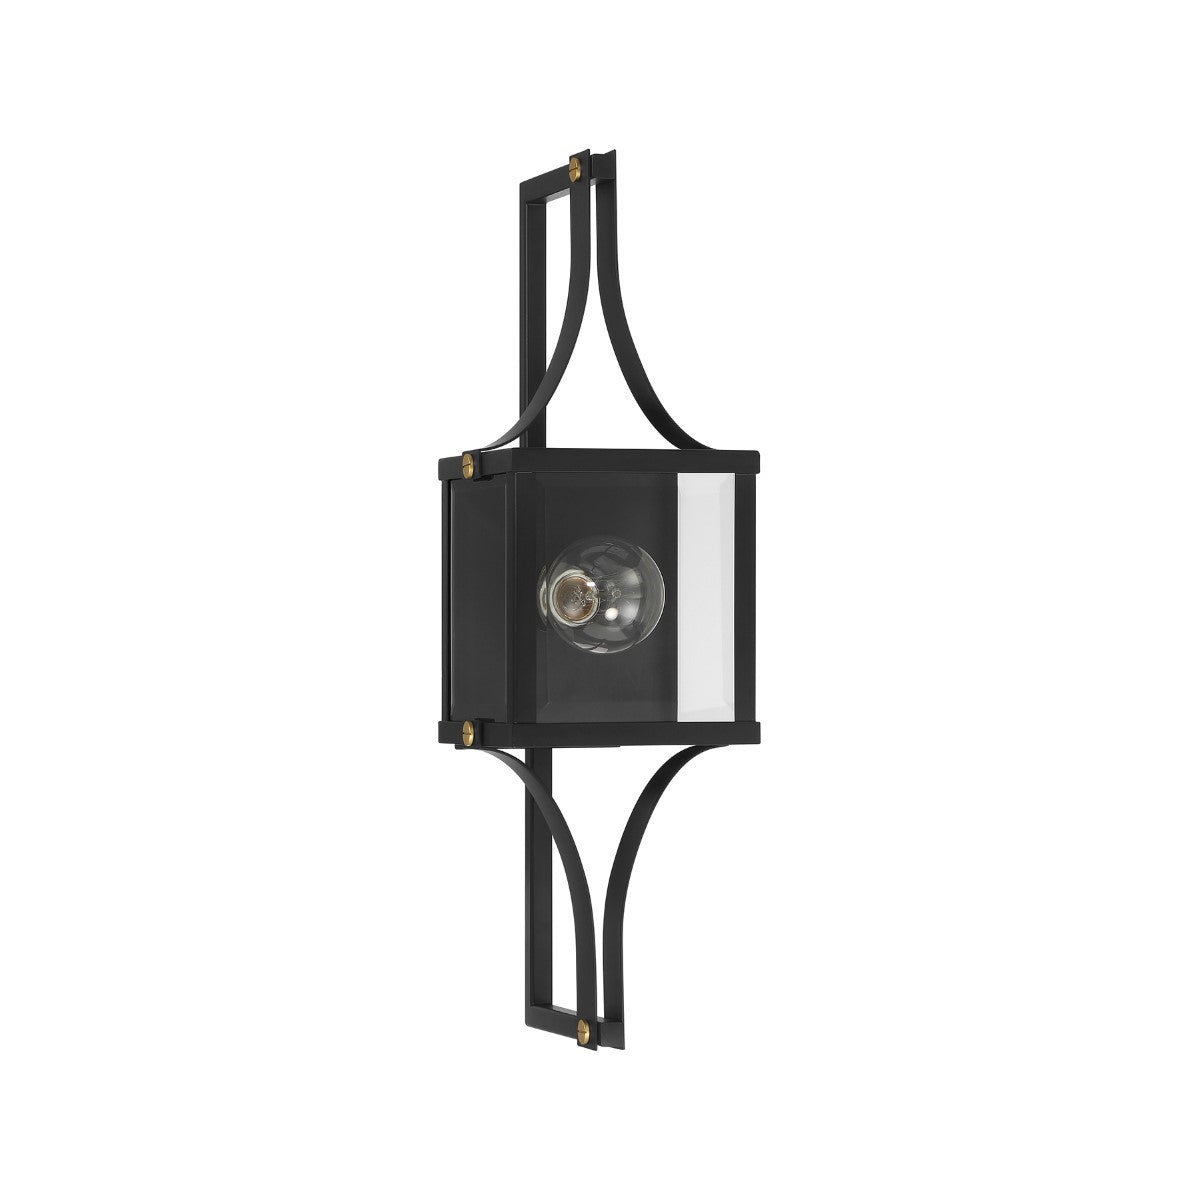 Raeburn 23 in. Outdoor Wall Lantern Matte Black and Weathered Brushed Brass Finish